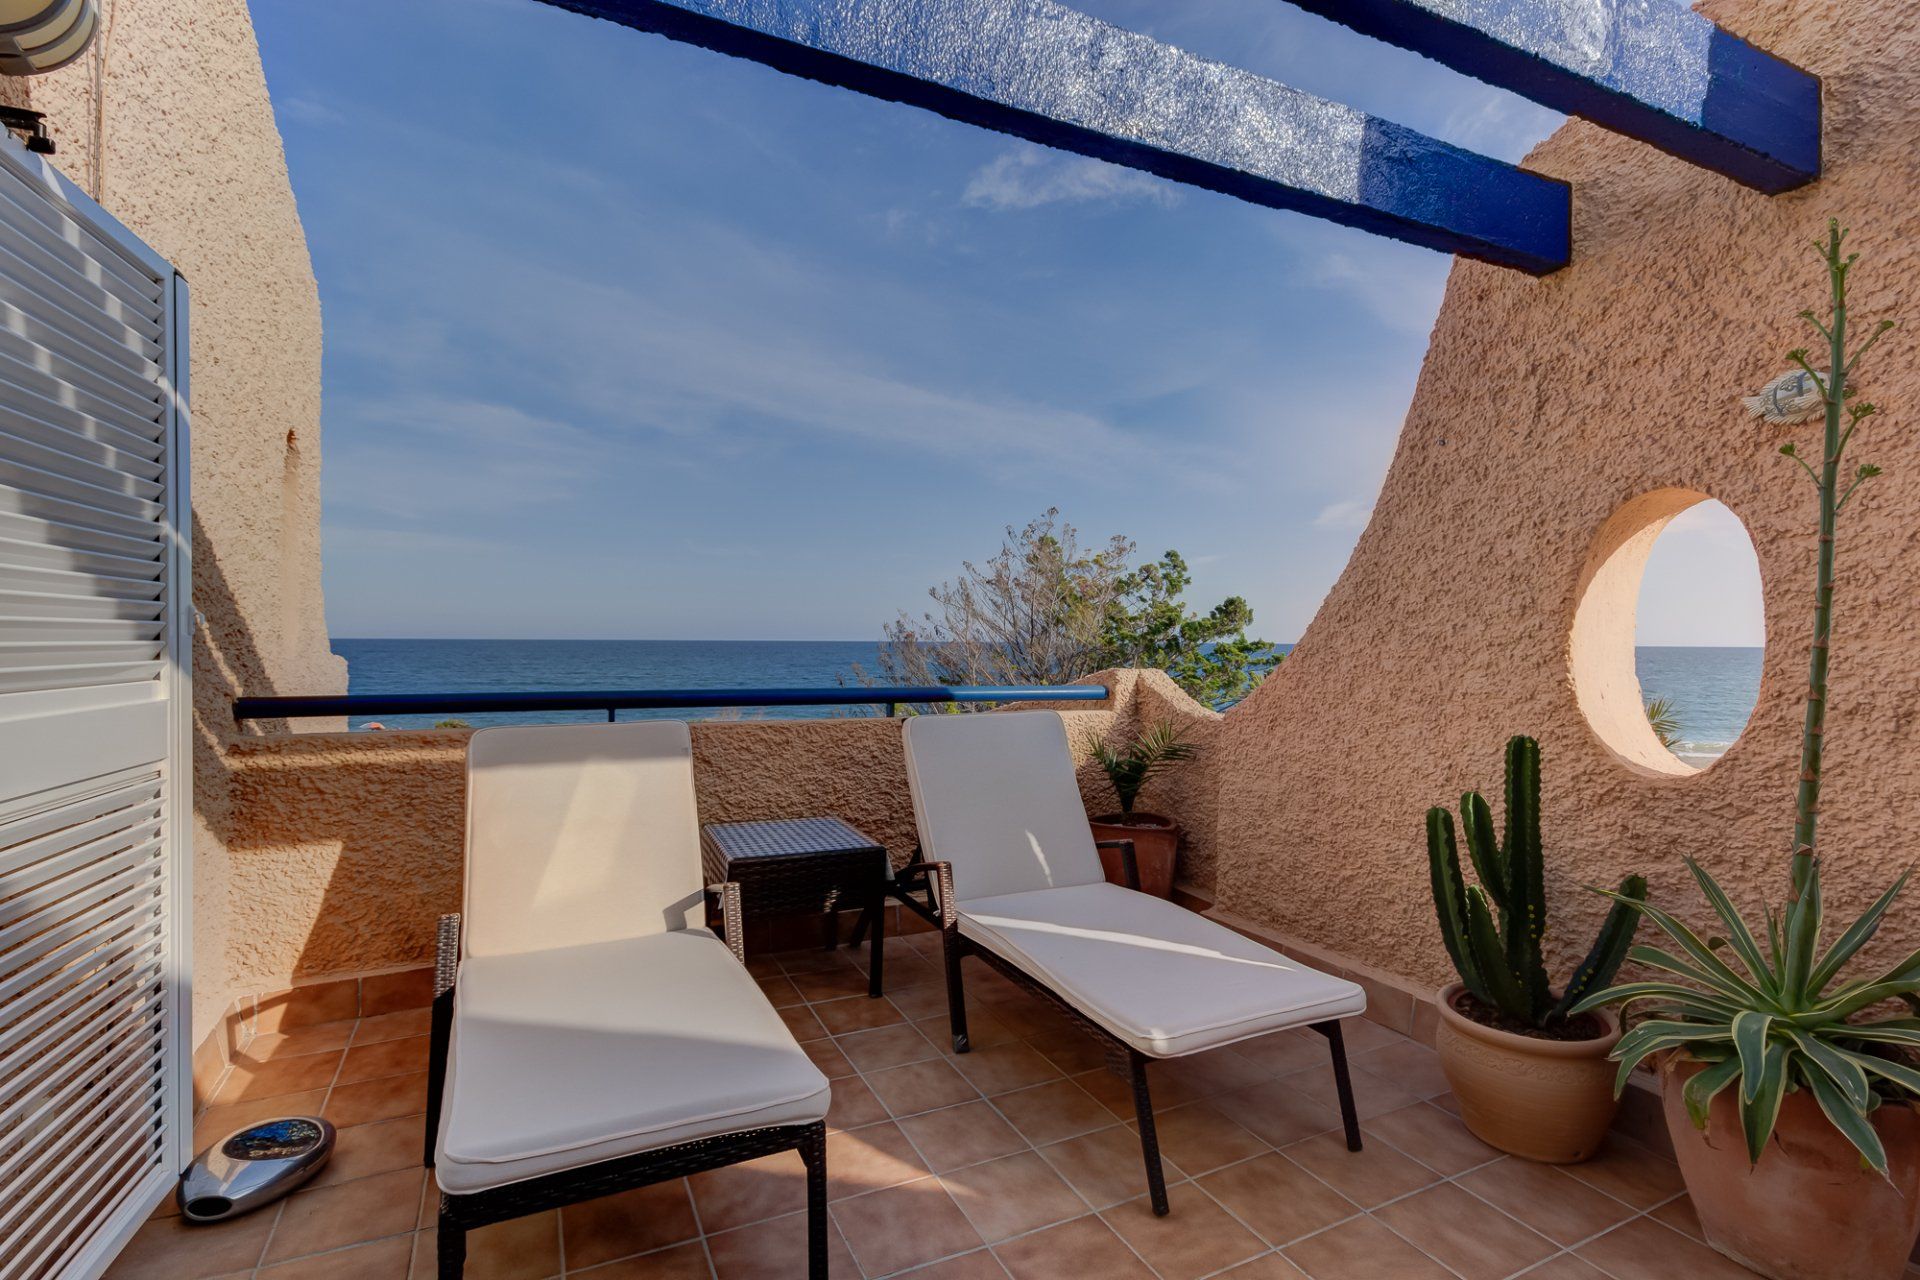 private terrace with two sun loungers and a view of the sea behind